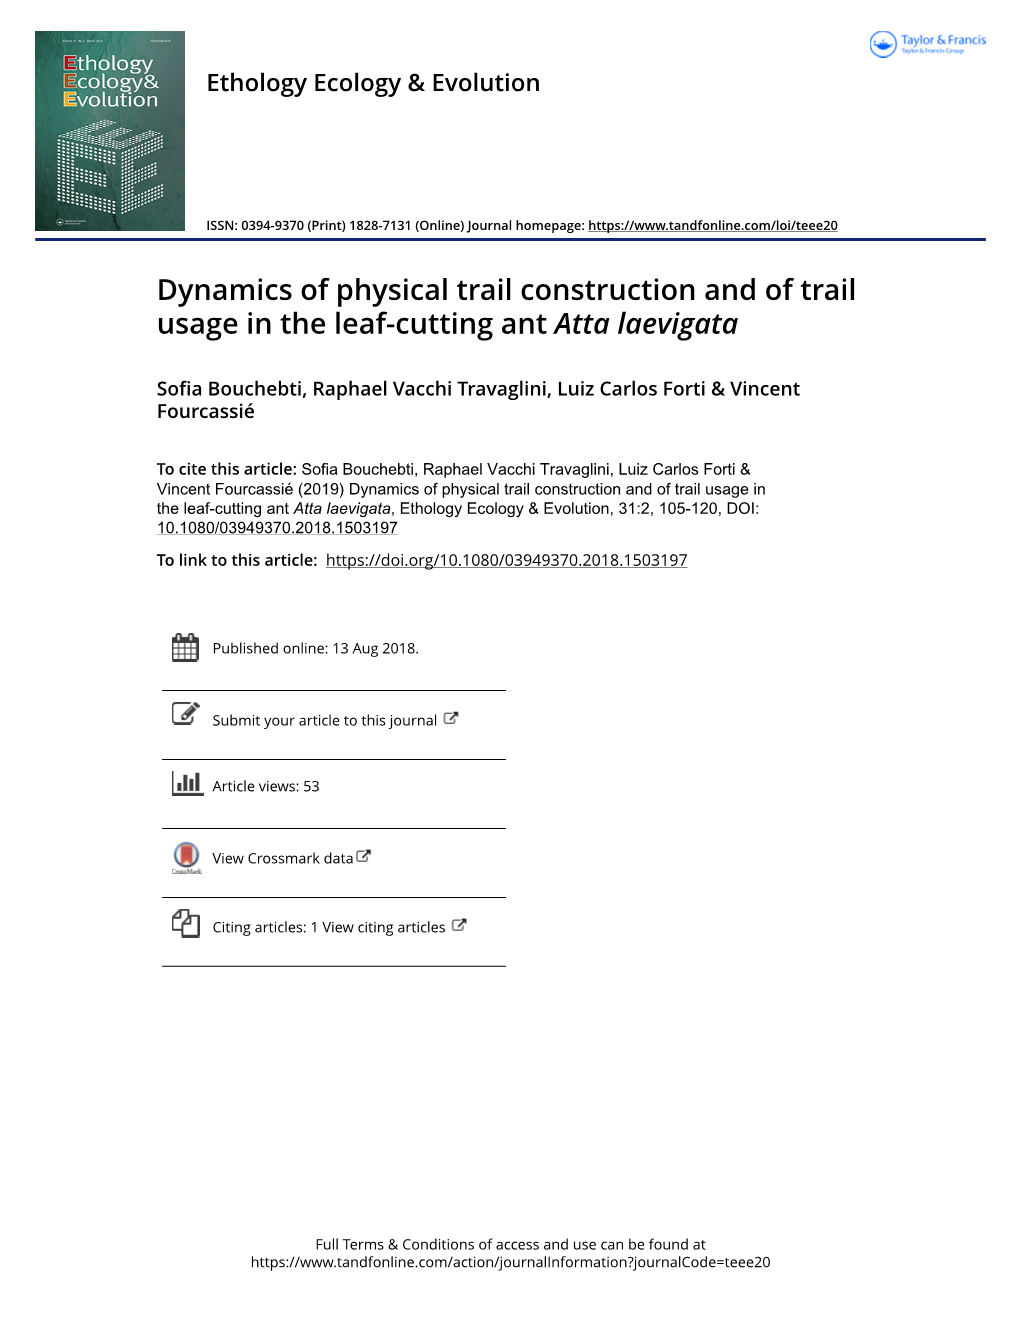 Dynamics of Physical Trail Construction and of Trail Usage in the Leaf-Cutting Ant Atta Laevigata